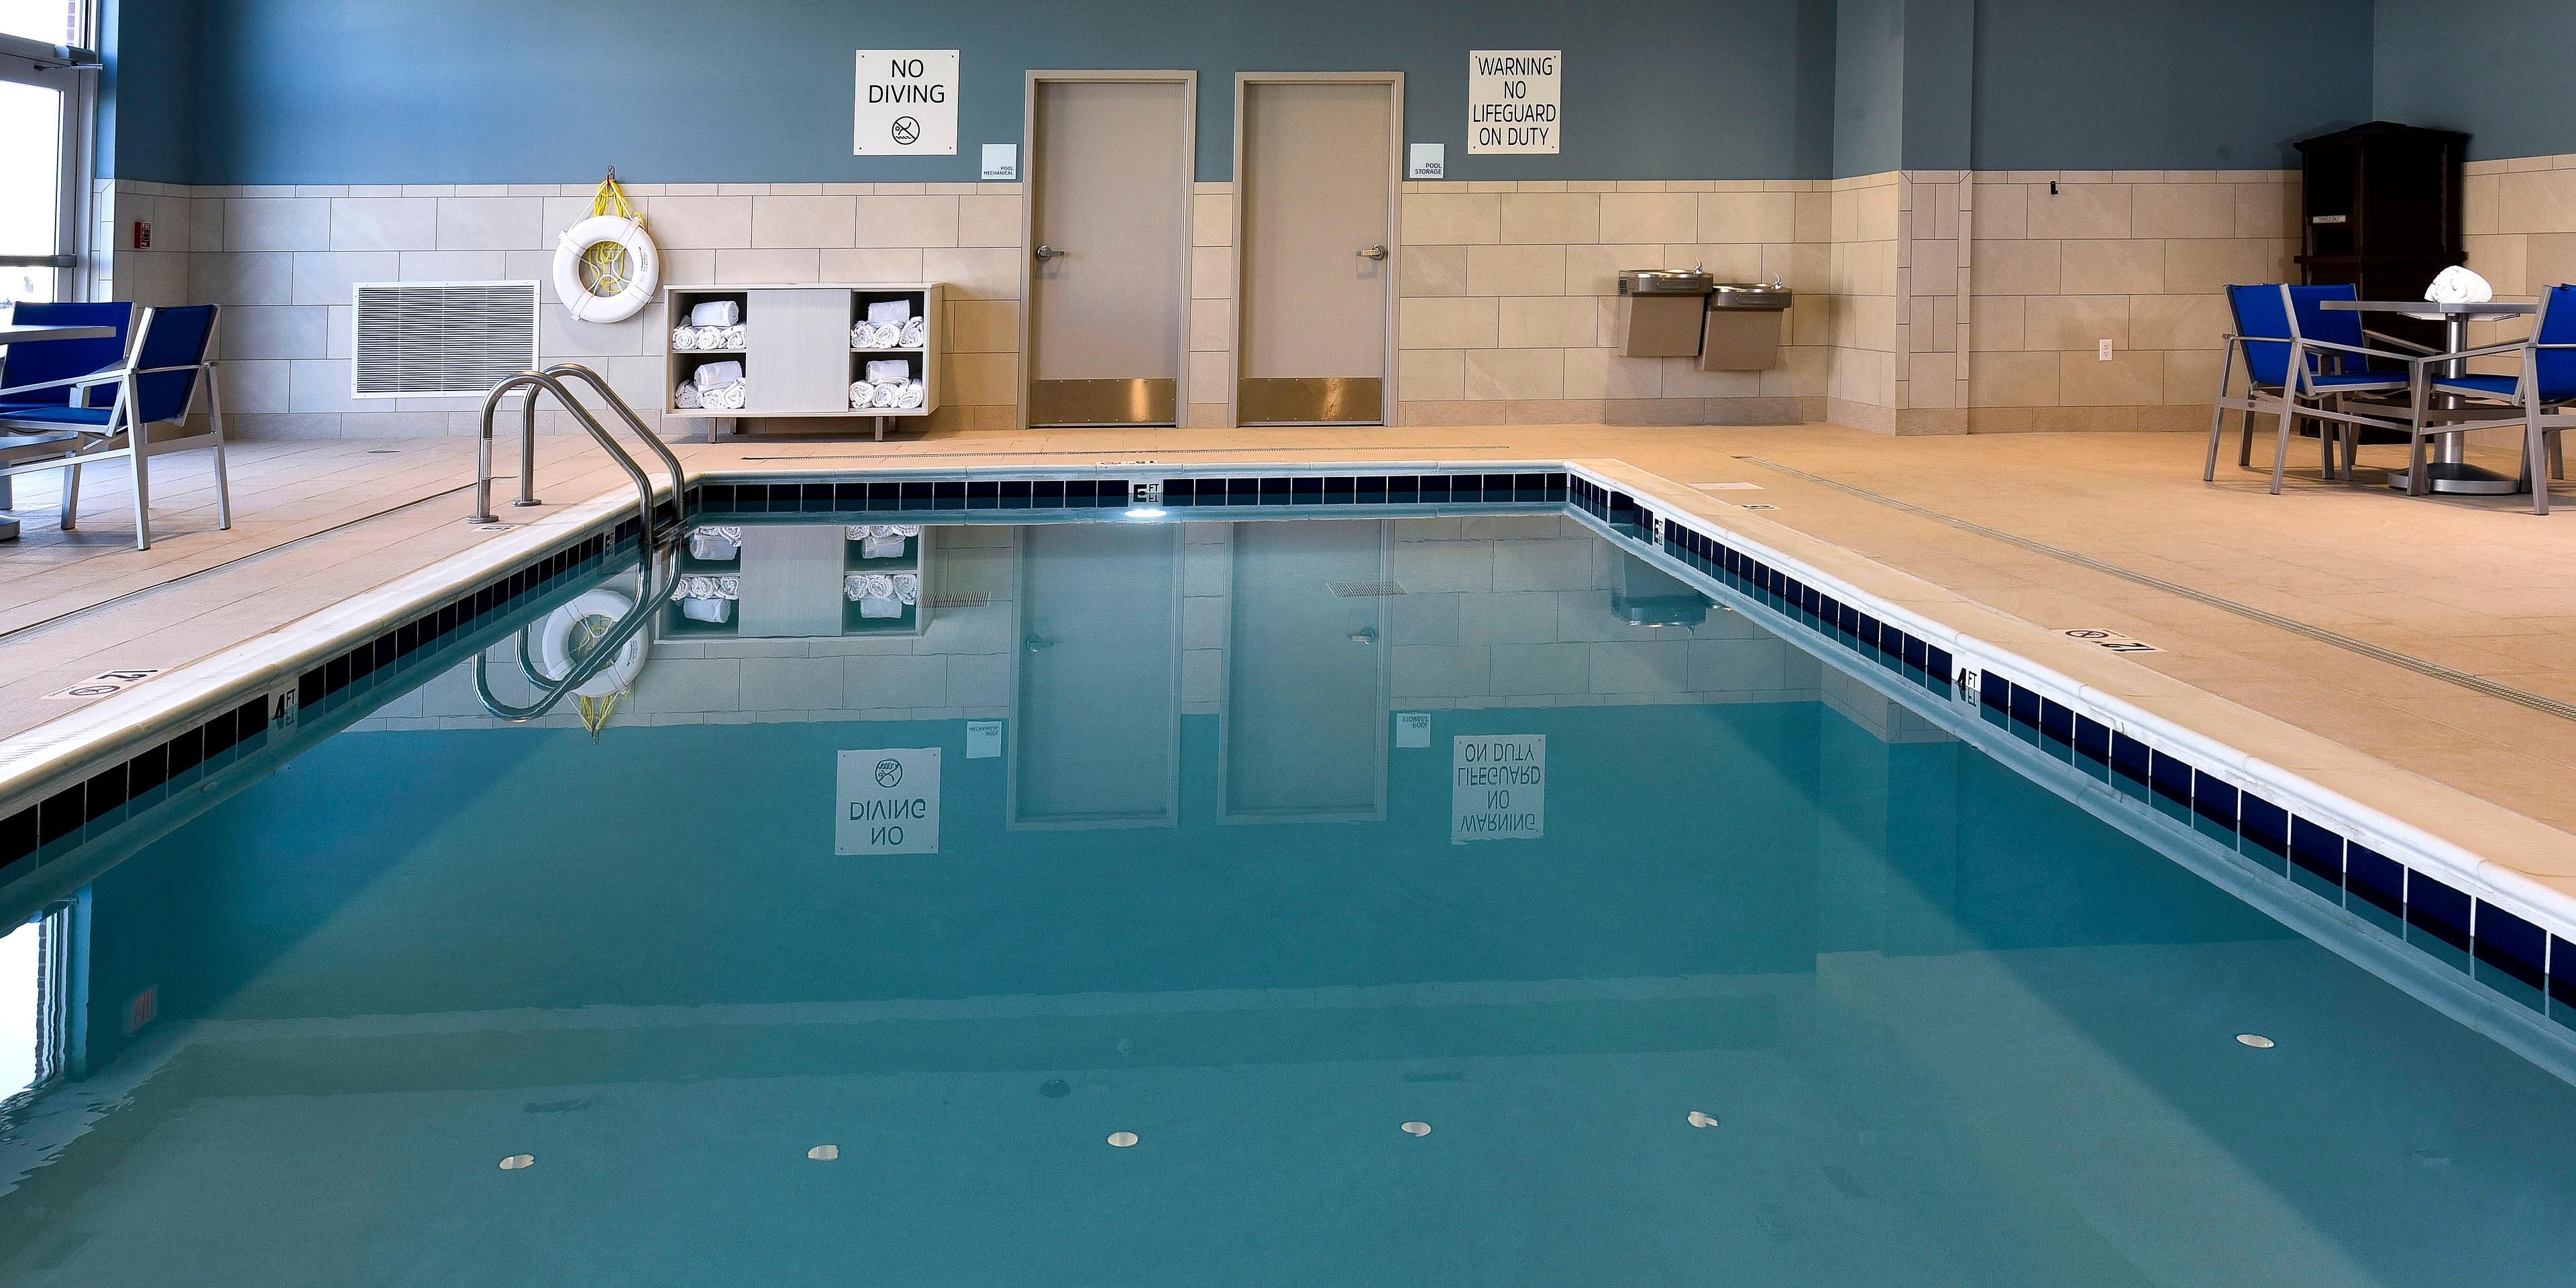 Dive into comfort year-round with our indoor heated pool. Whether it's summer or winter, enjoy a relaxing swim in a welcoming atmosphere. Our commitment to your extends throughout every season. 